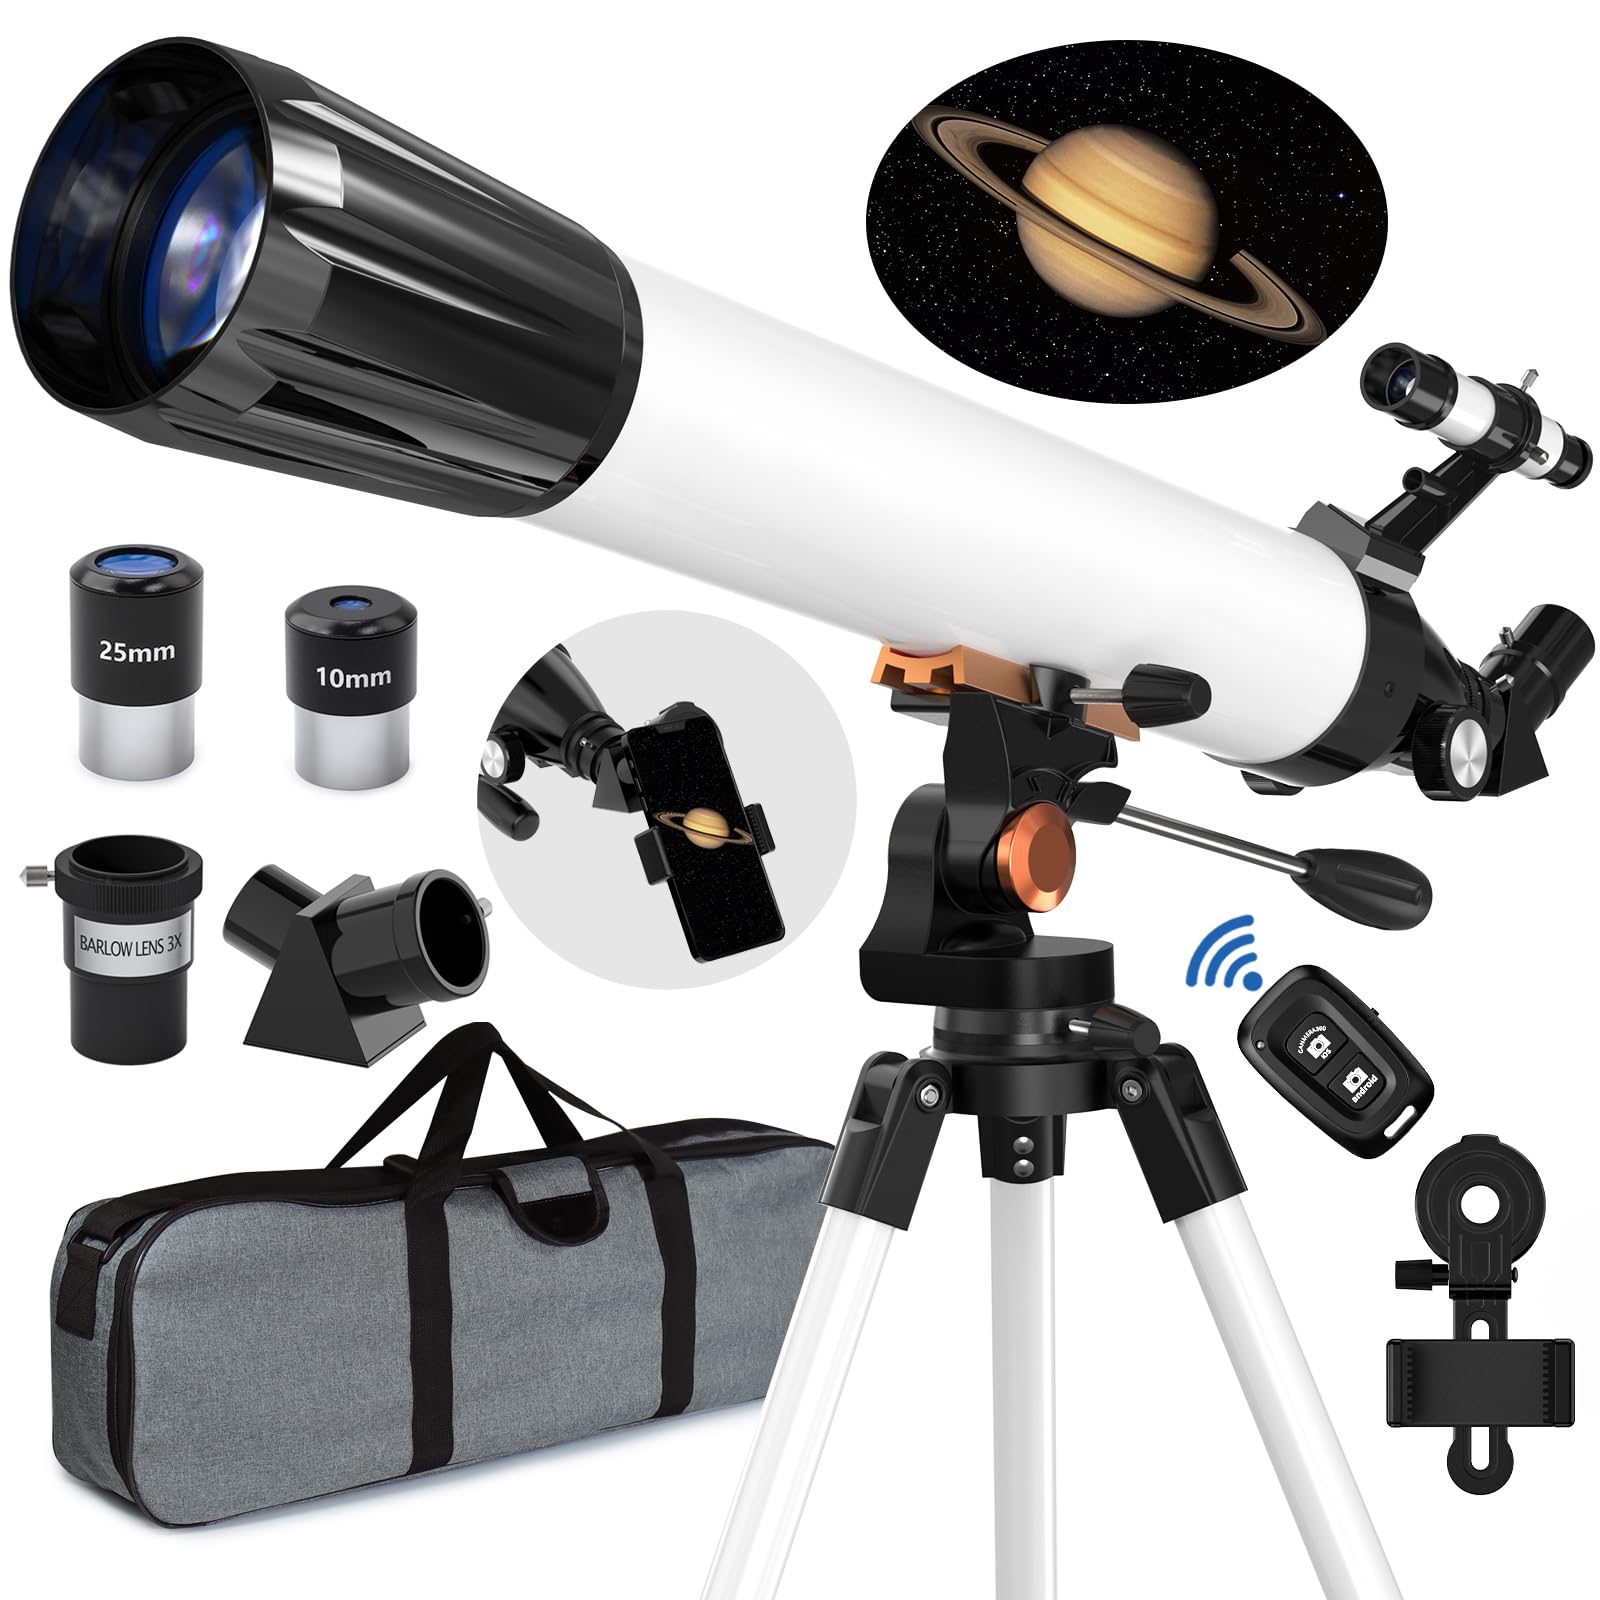 LUVONI Telescope 90mm Aperture 800mm Telescope for Adults with High Powered, Refractor Telescopes for Kids & Beginners, Multi-Coated High Transmission AZ Mount Portable Telescope Includes Carry Bag